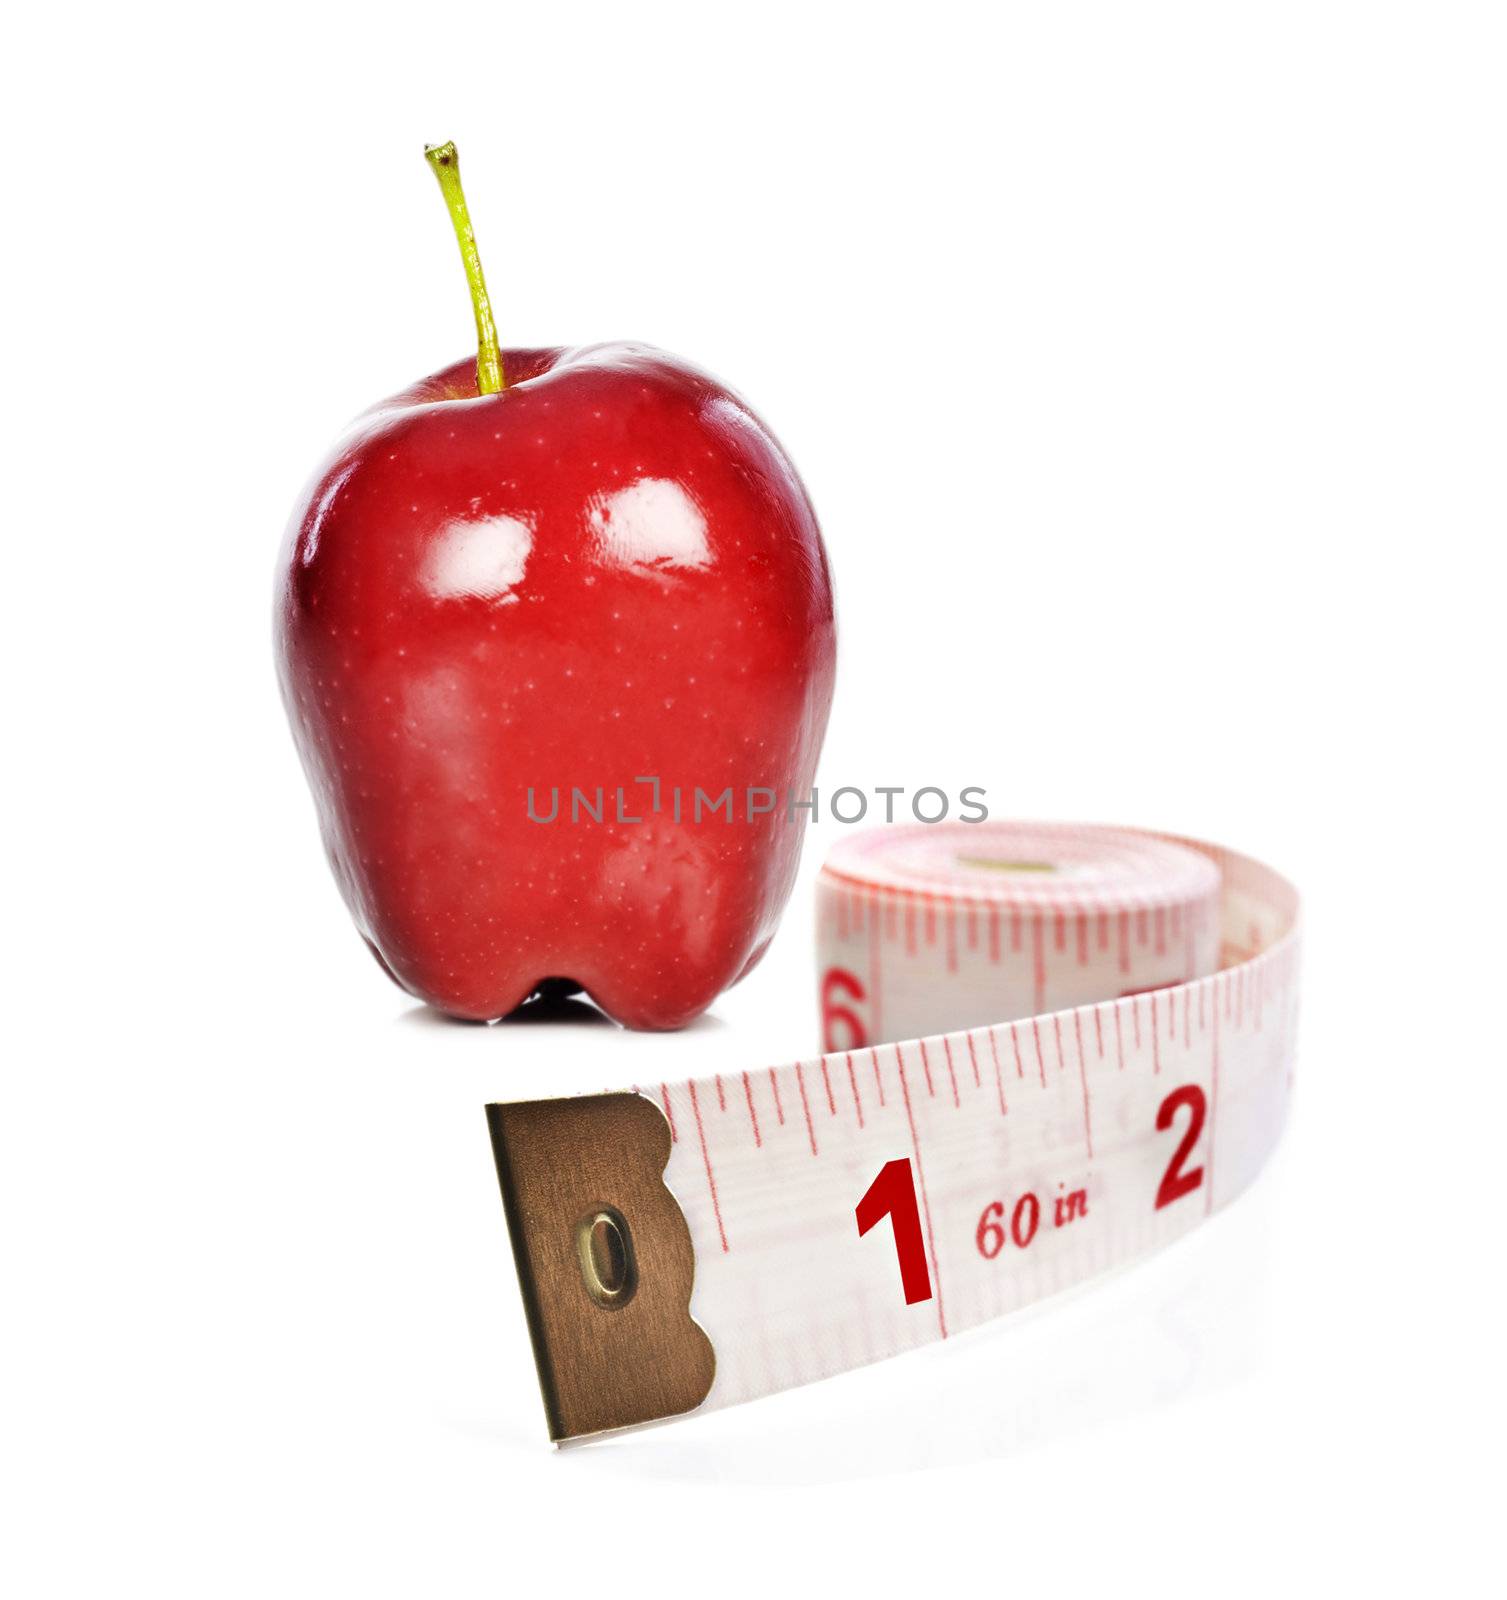 Healthy lifestyle - fresh healthy apple and tape measure on white